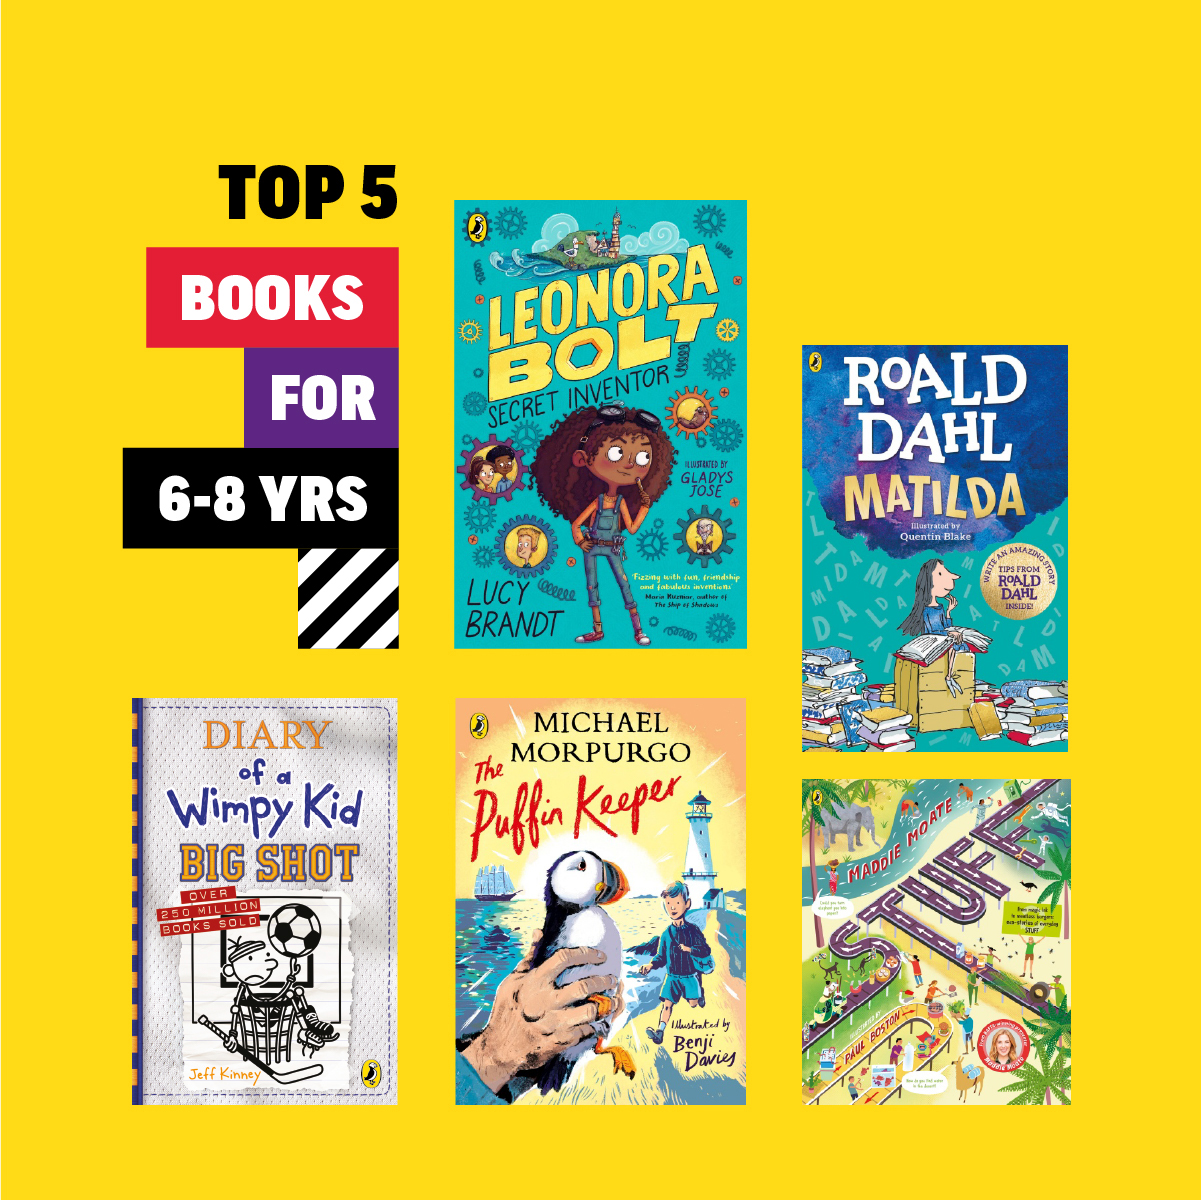 An image of five of the top books for 6-8s on top of a bright yellow background